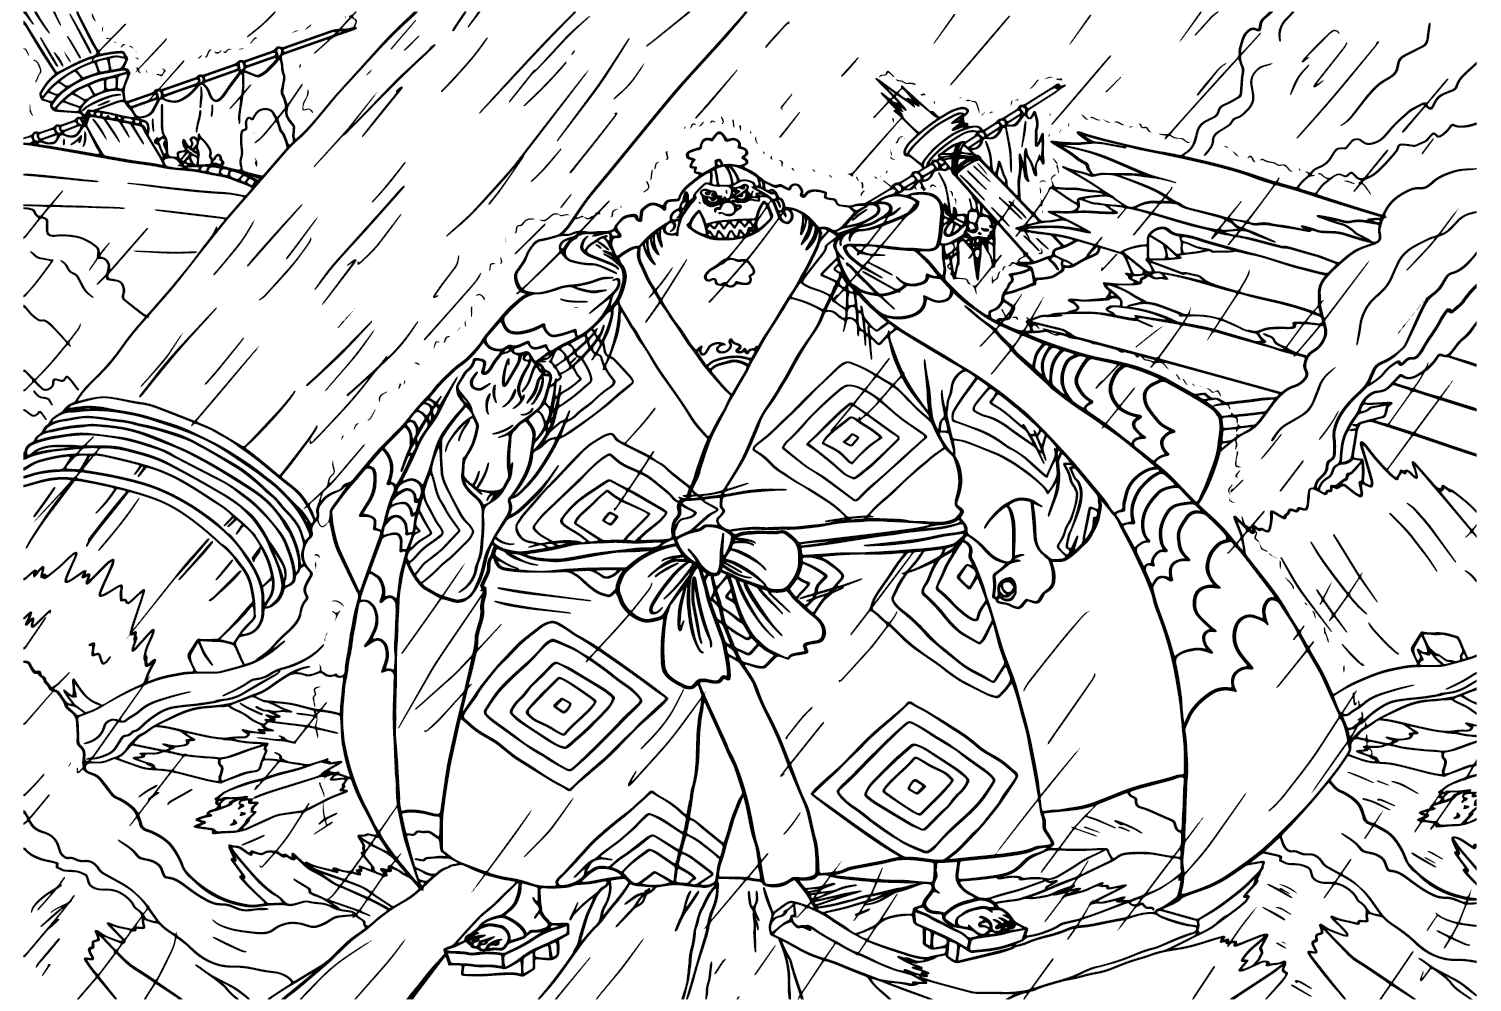 One Piece Jinbe Coloring Page from Jinbe